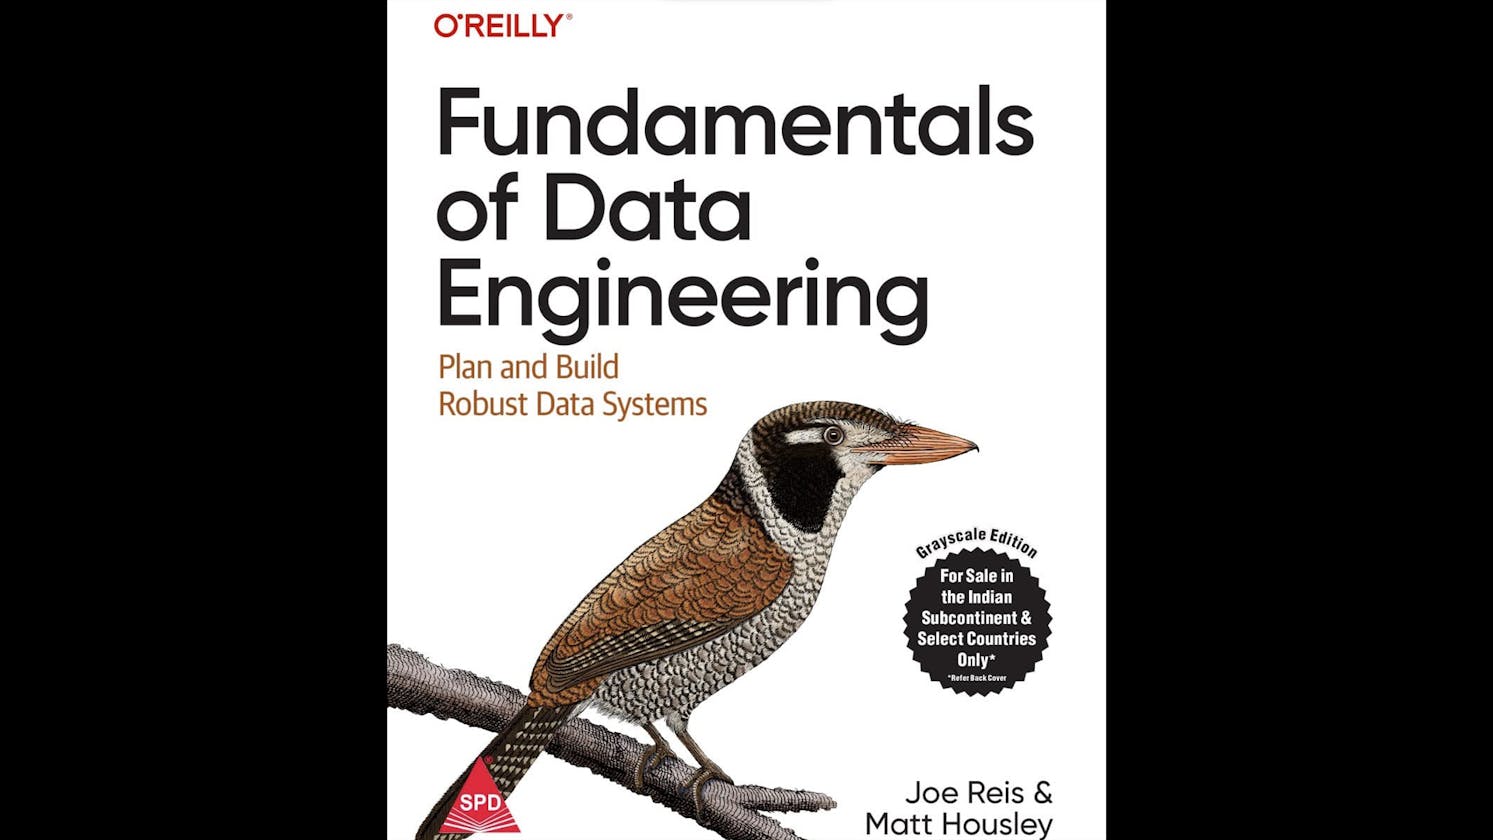 Book Review- Fundamentals of Data Engineering